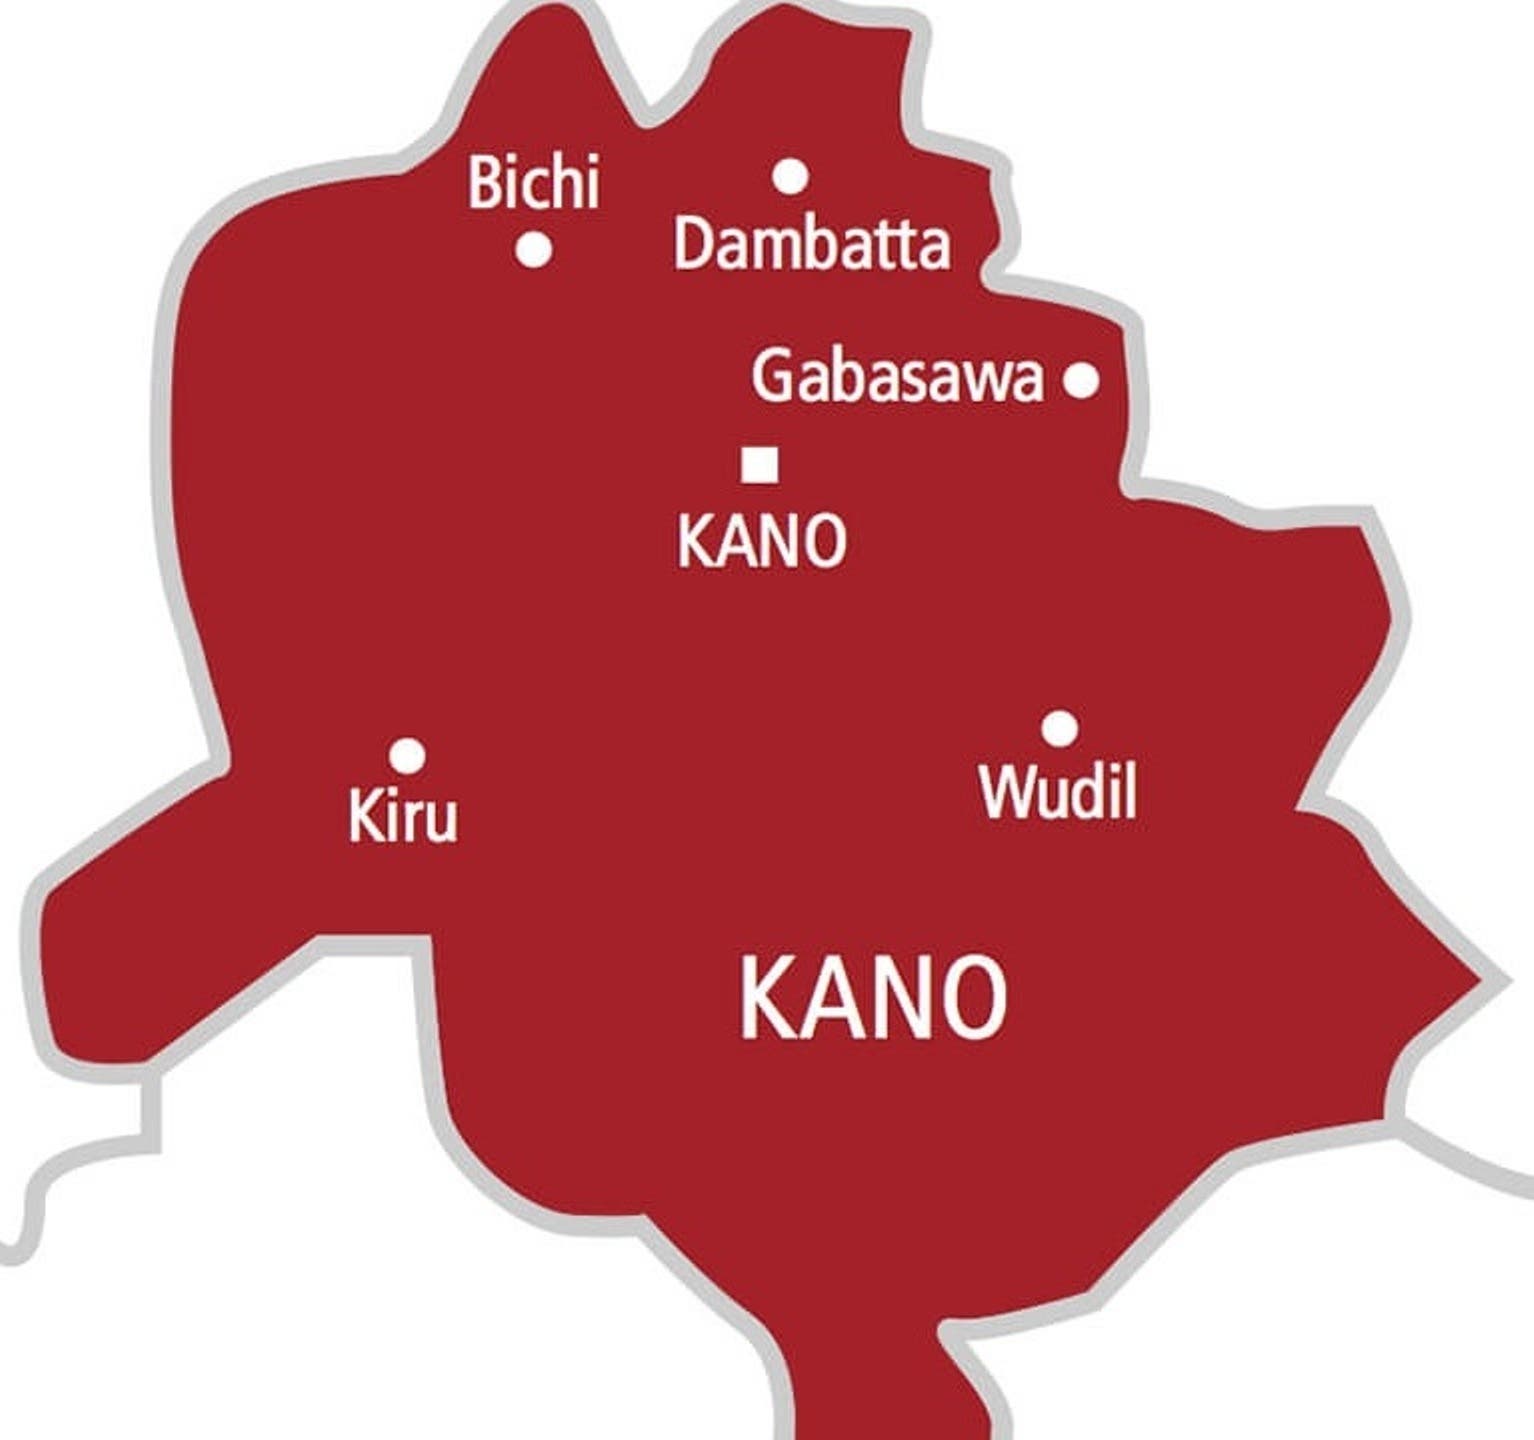 "We Have Done Nothing Wrong" - Bichi Emirate Stakeholders Send Message To Kano Government